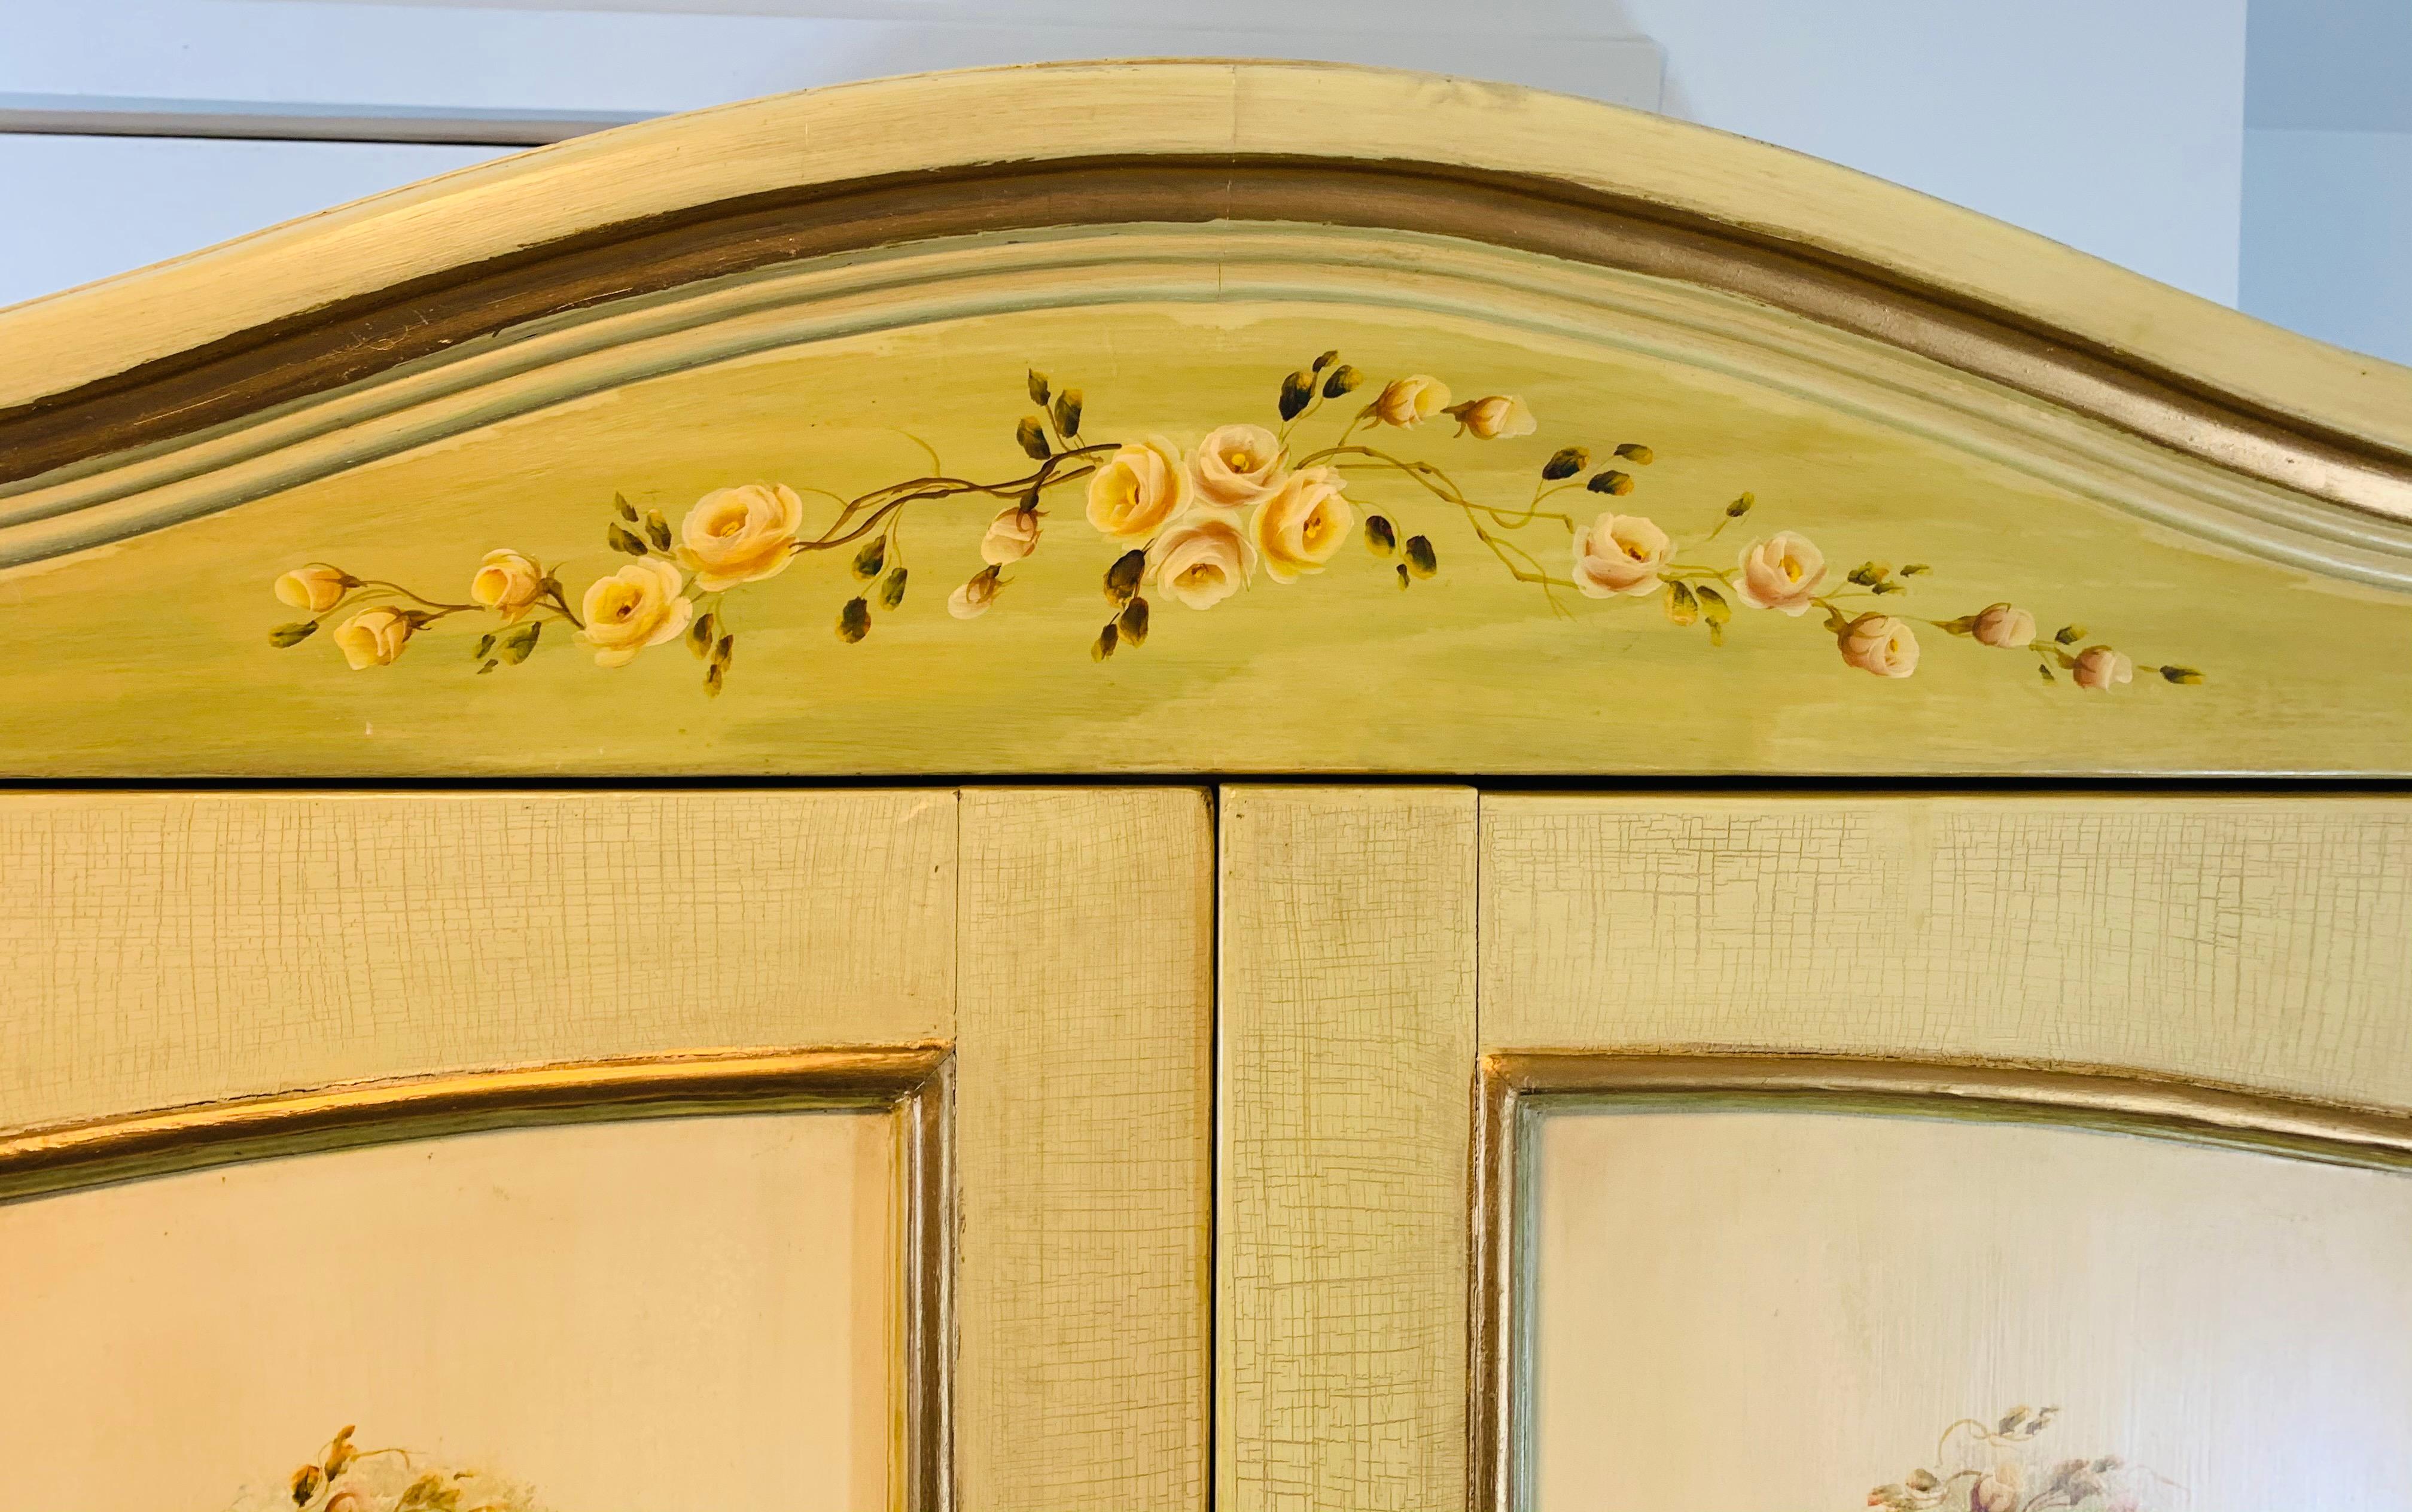 A stunning French Provincial armoire romantically hand painted in antiqued cream and light green colors with large plant design on each door and exquisite floral pattern on the drawers and the sides. The two door armoire features storage space